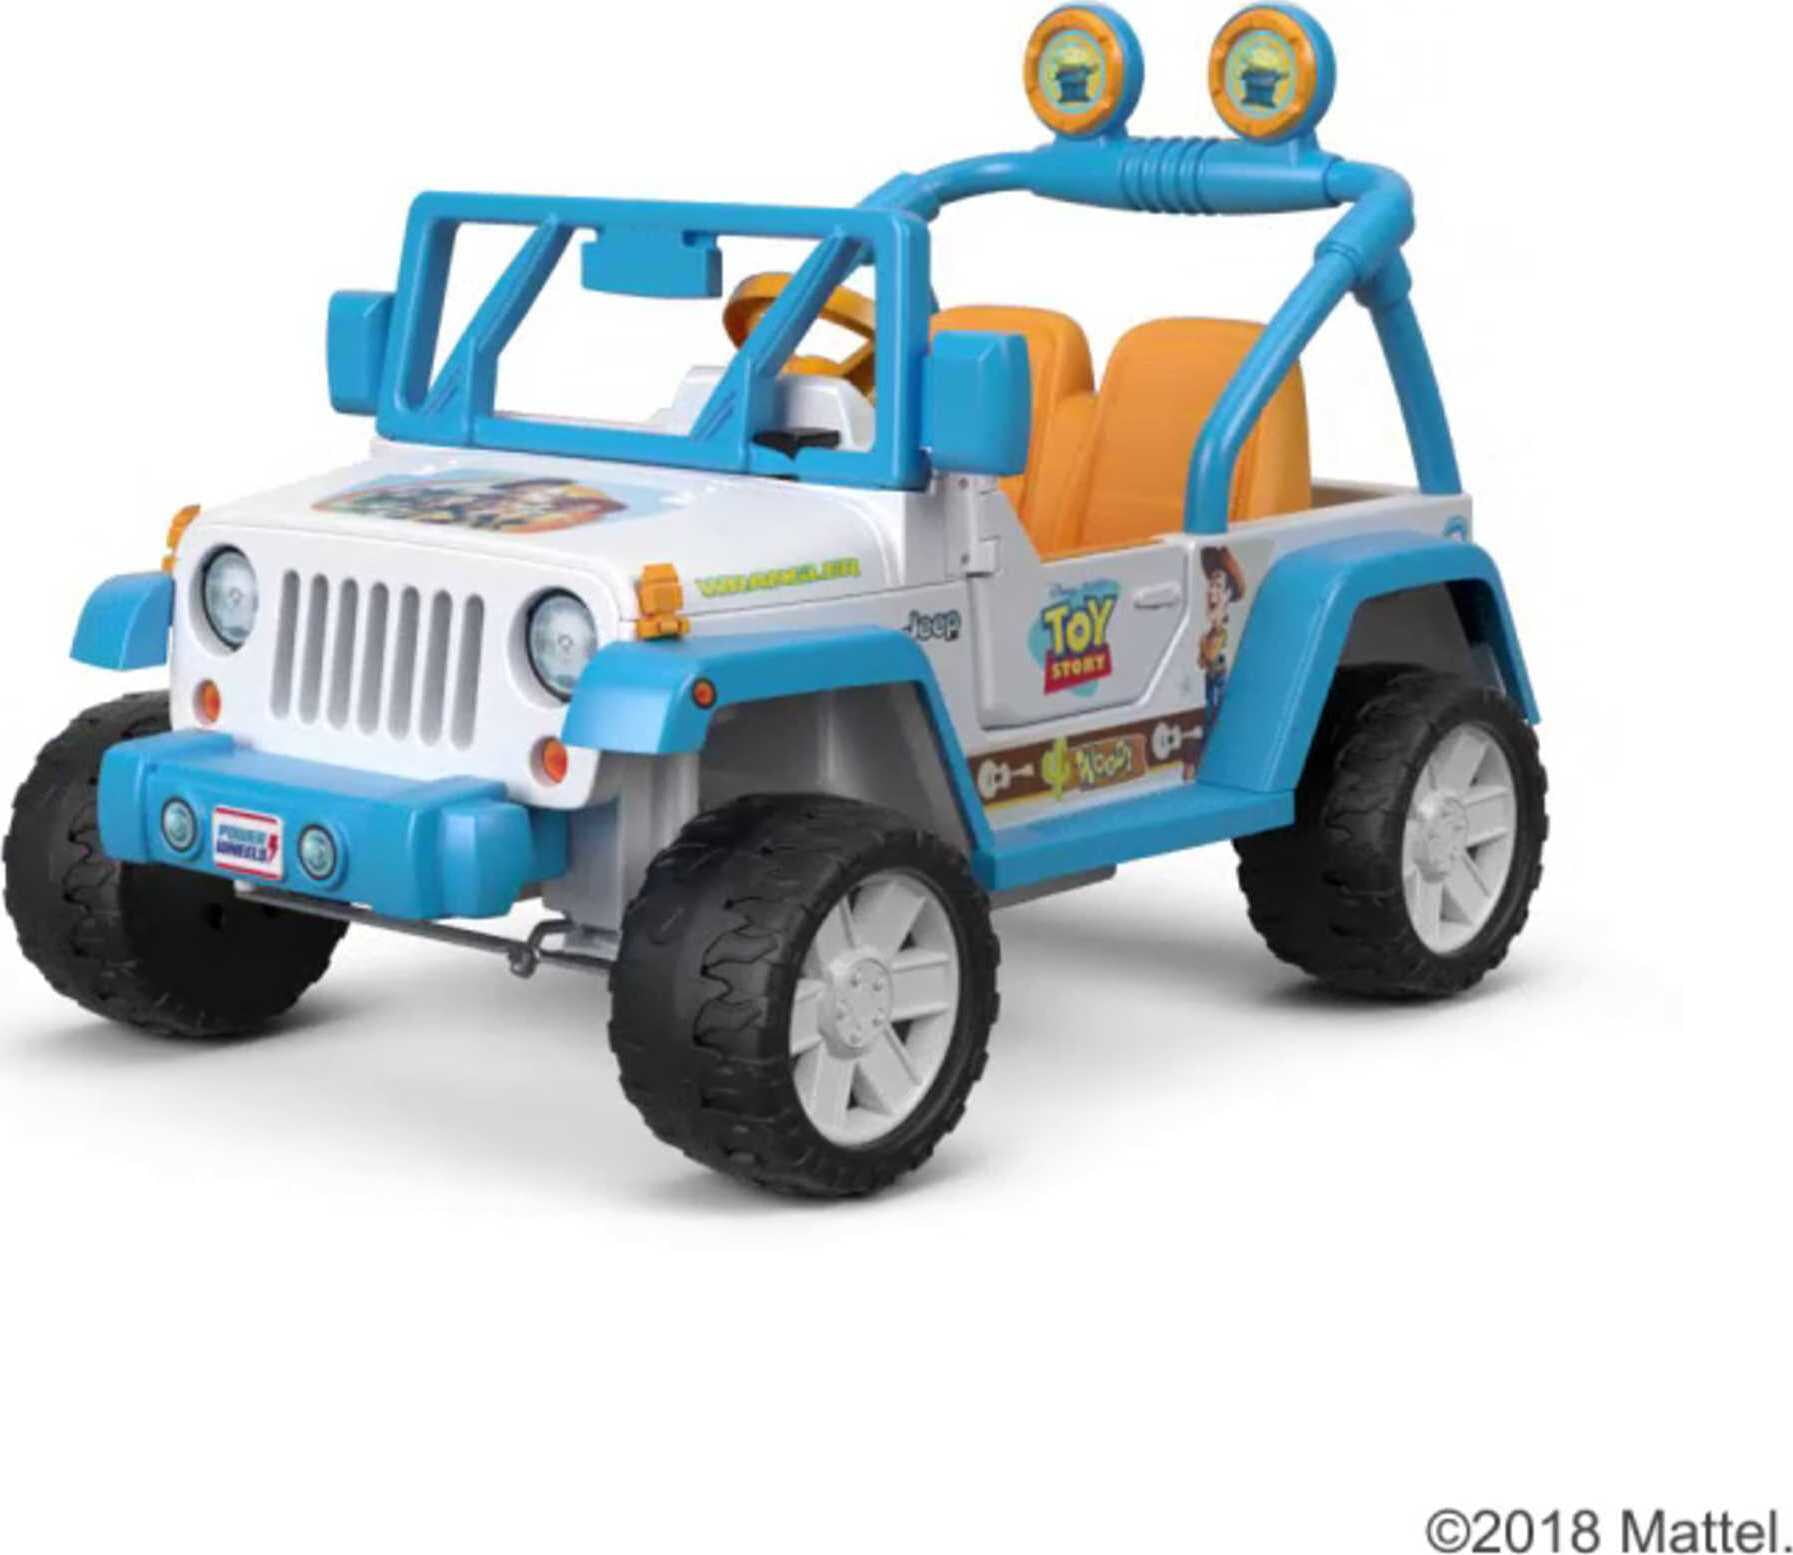 Power Wheels Disney Pixar Toy Story Jeep Wrangler Battery Powered Ride-On  Vehicle with Sounds 